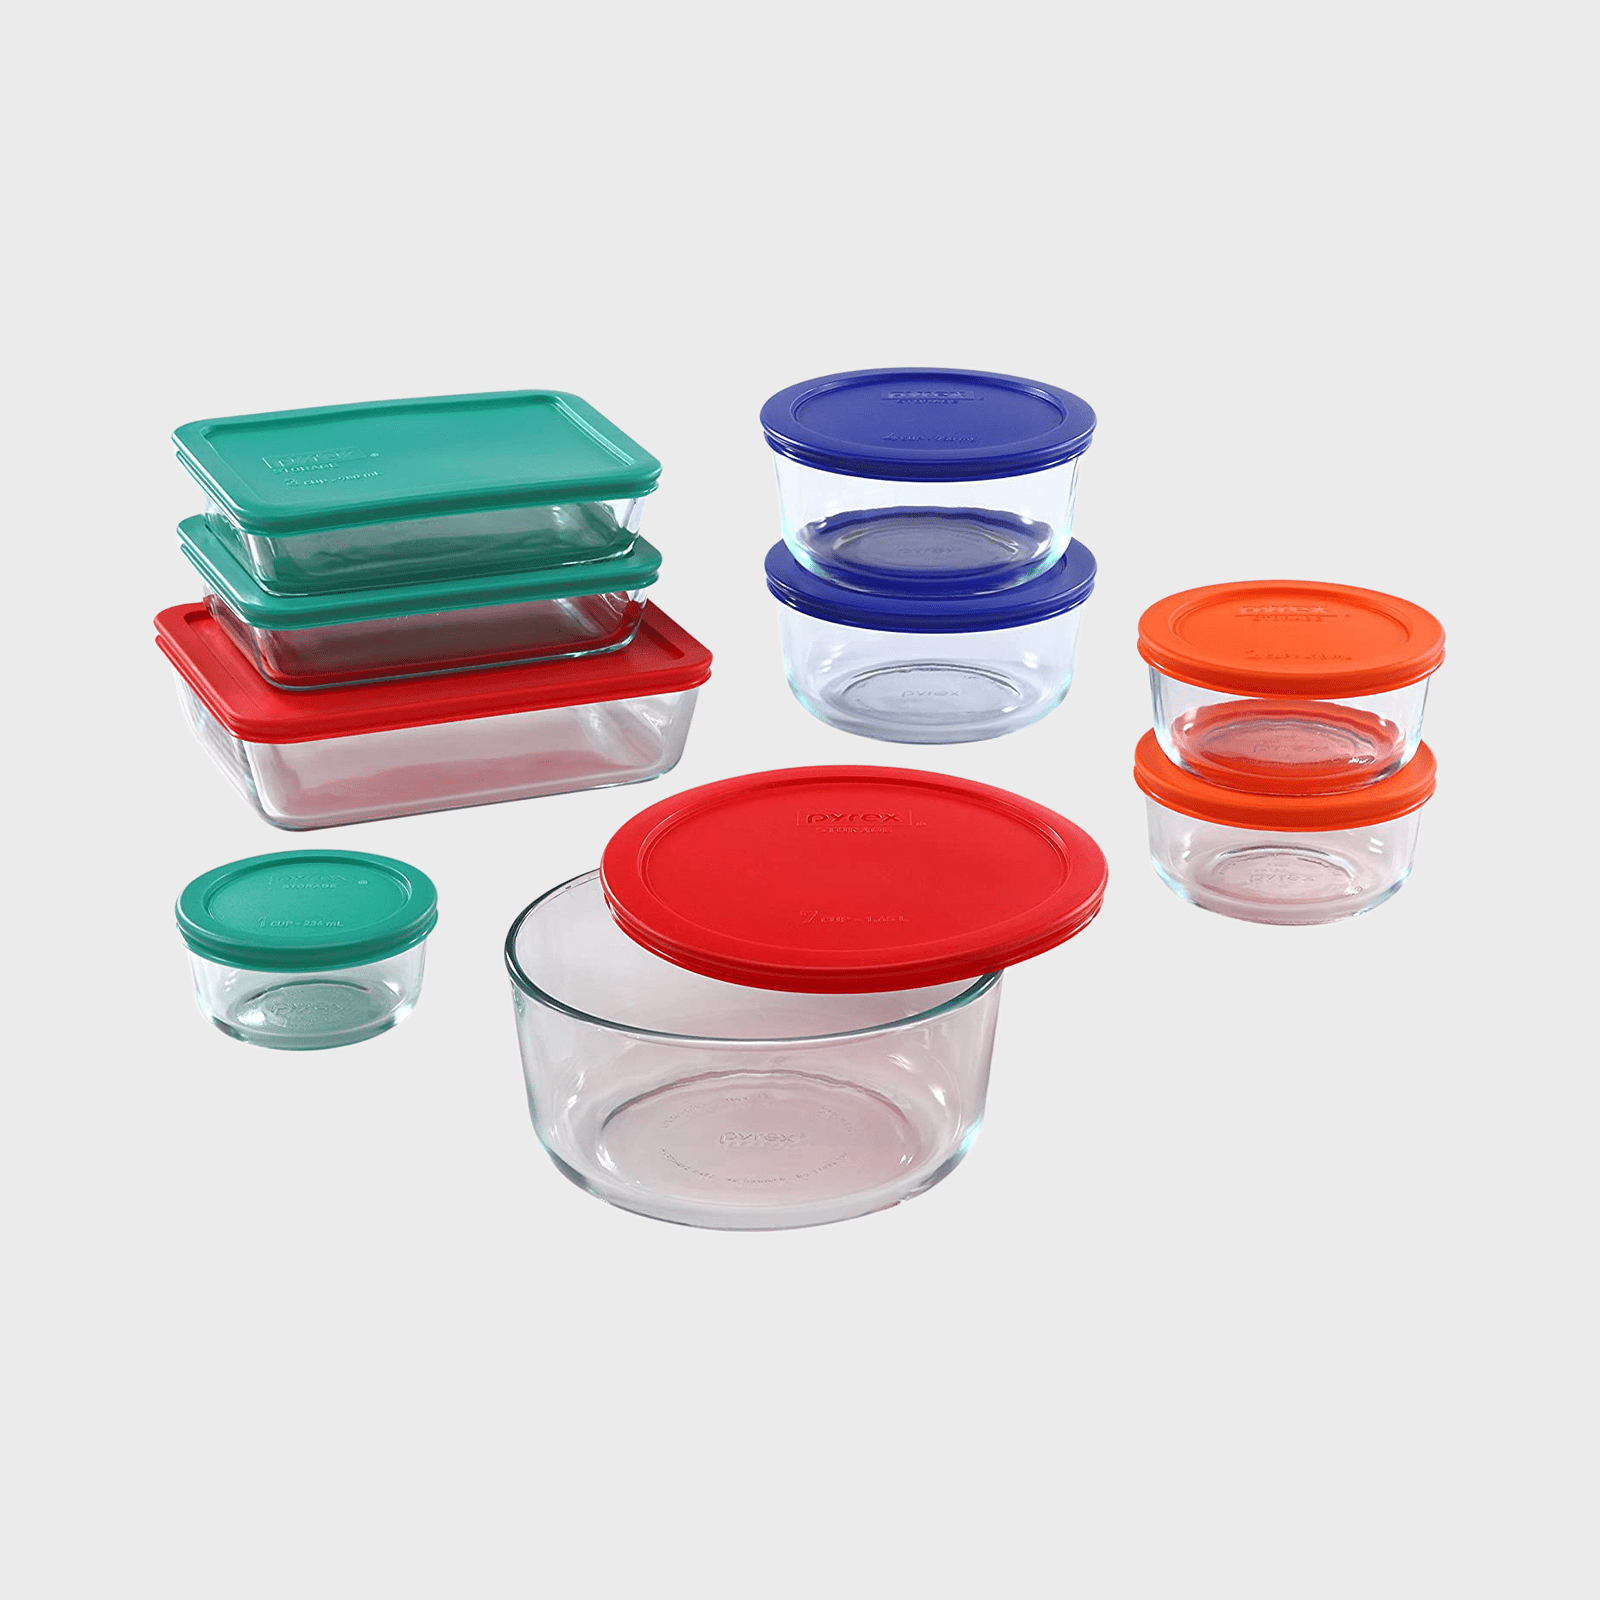 Mcirco Glass food storage containers locking lids upgraded airtight 10 pack  2 cl